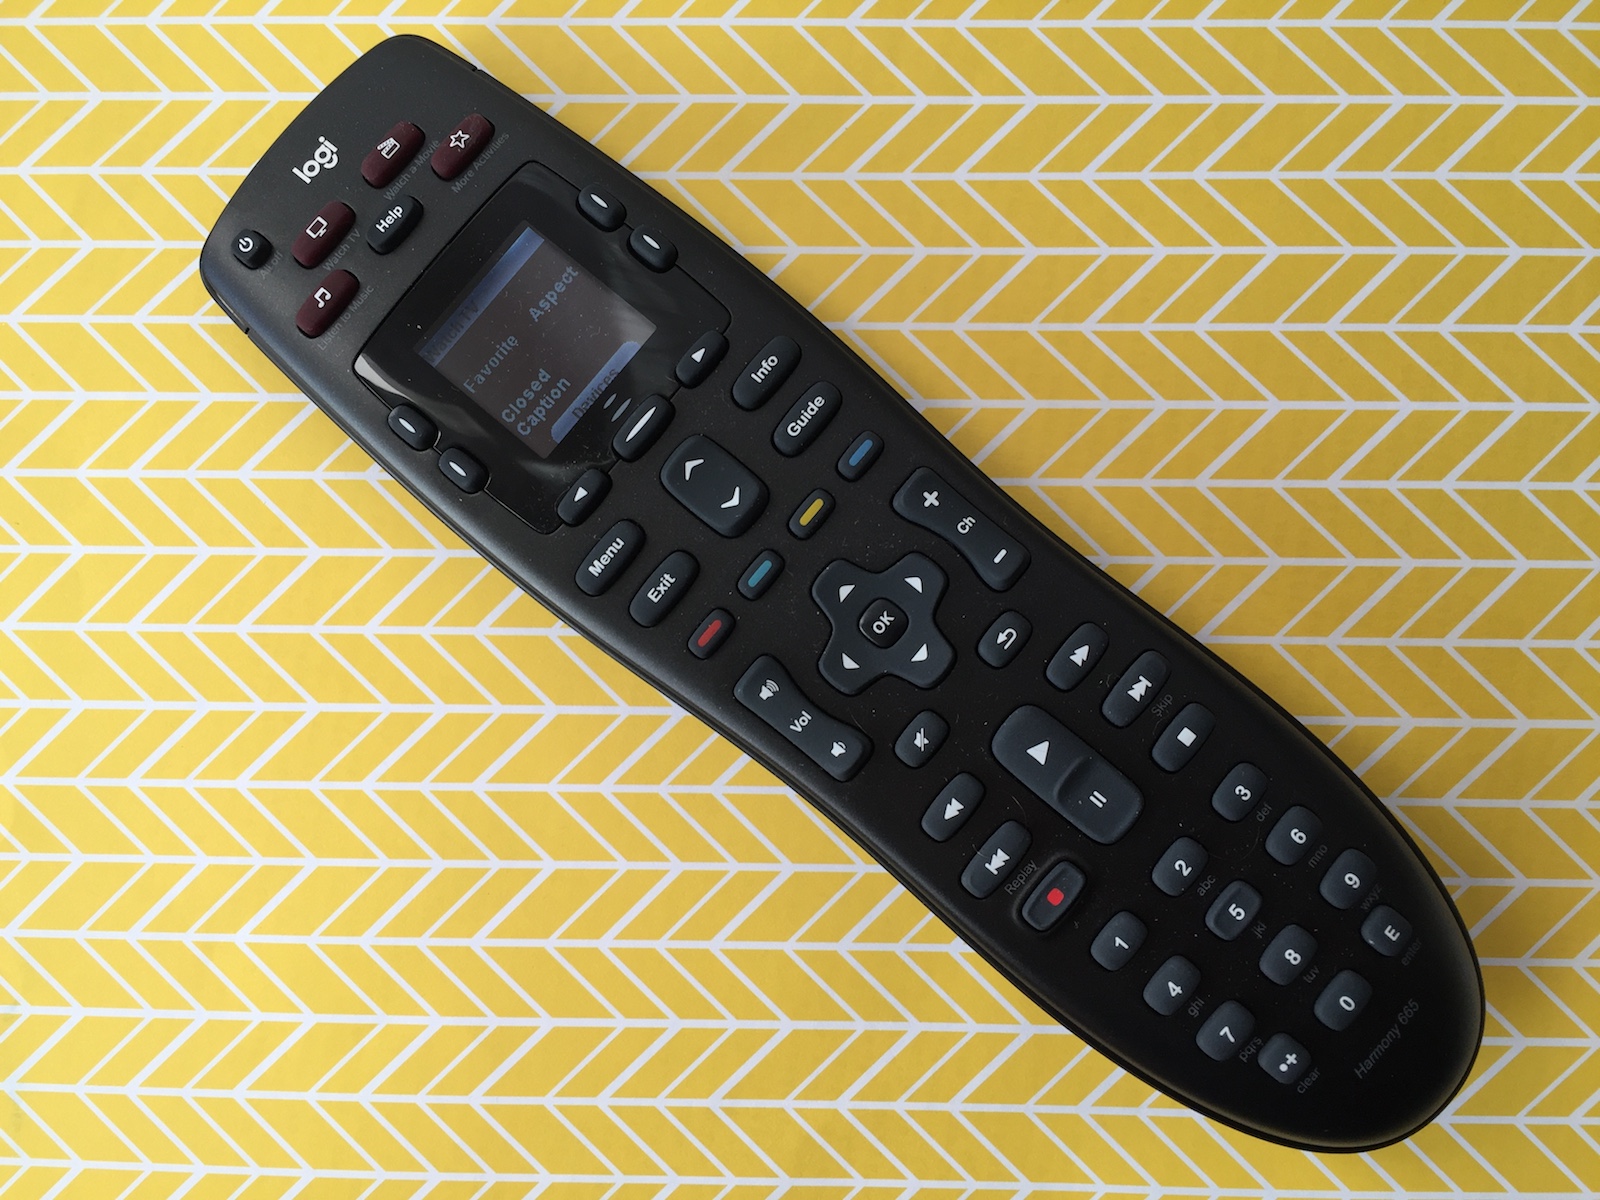 Harmony 665 universal remote review